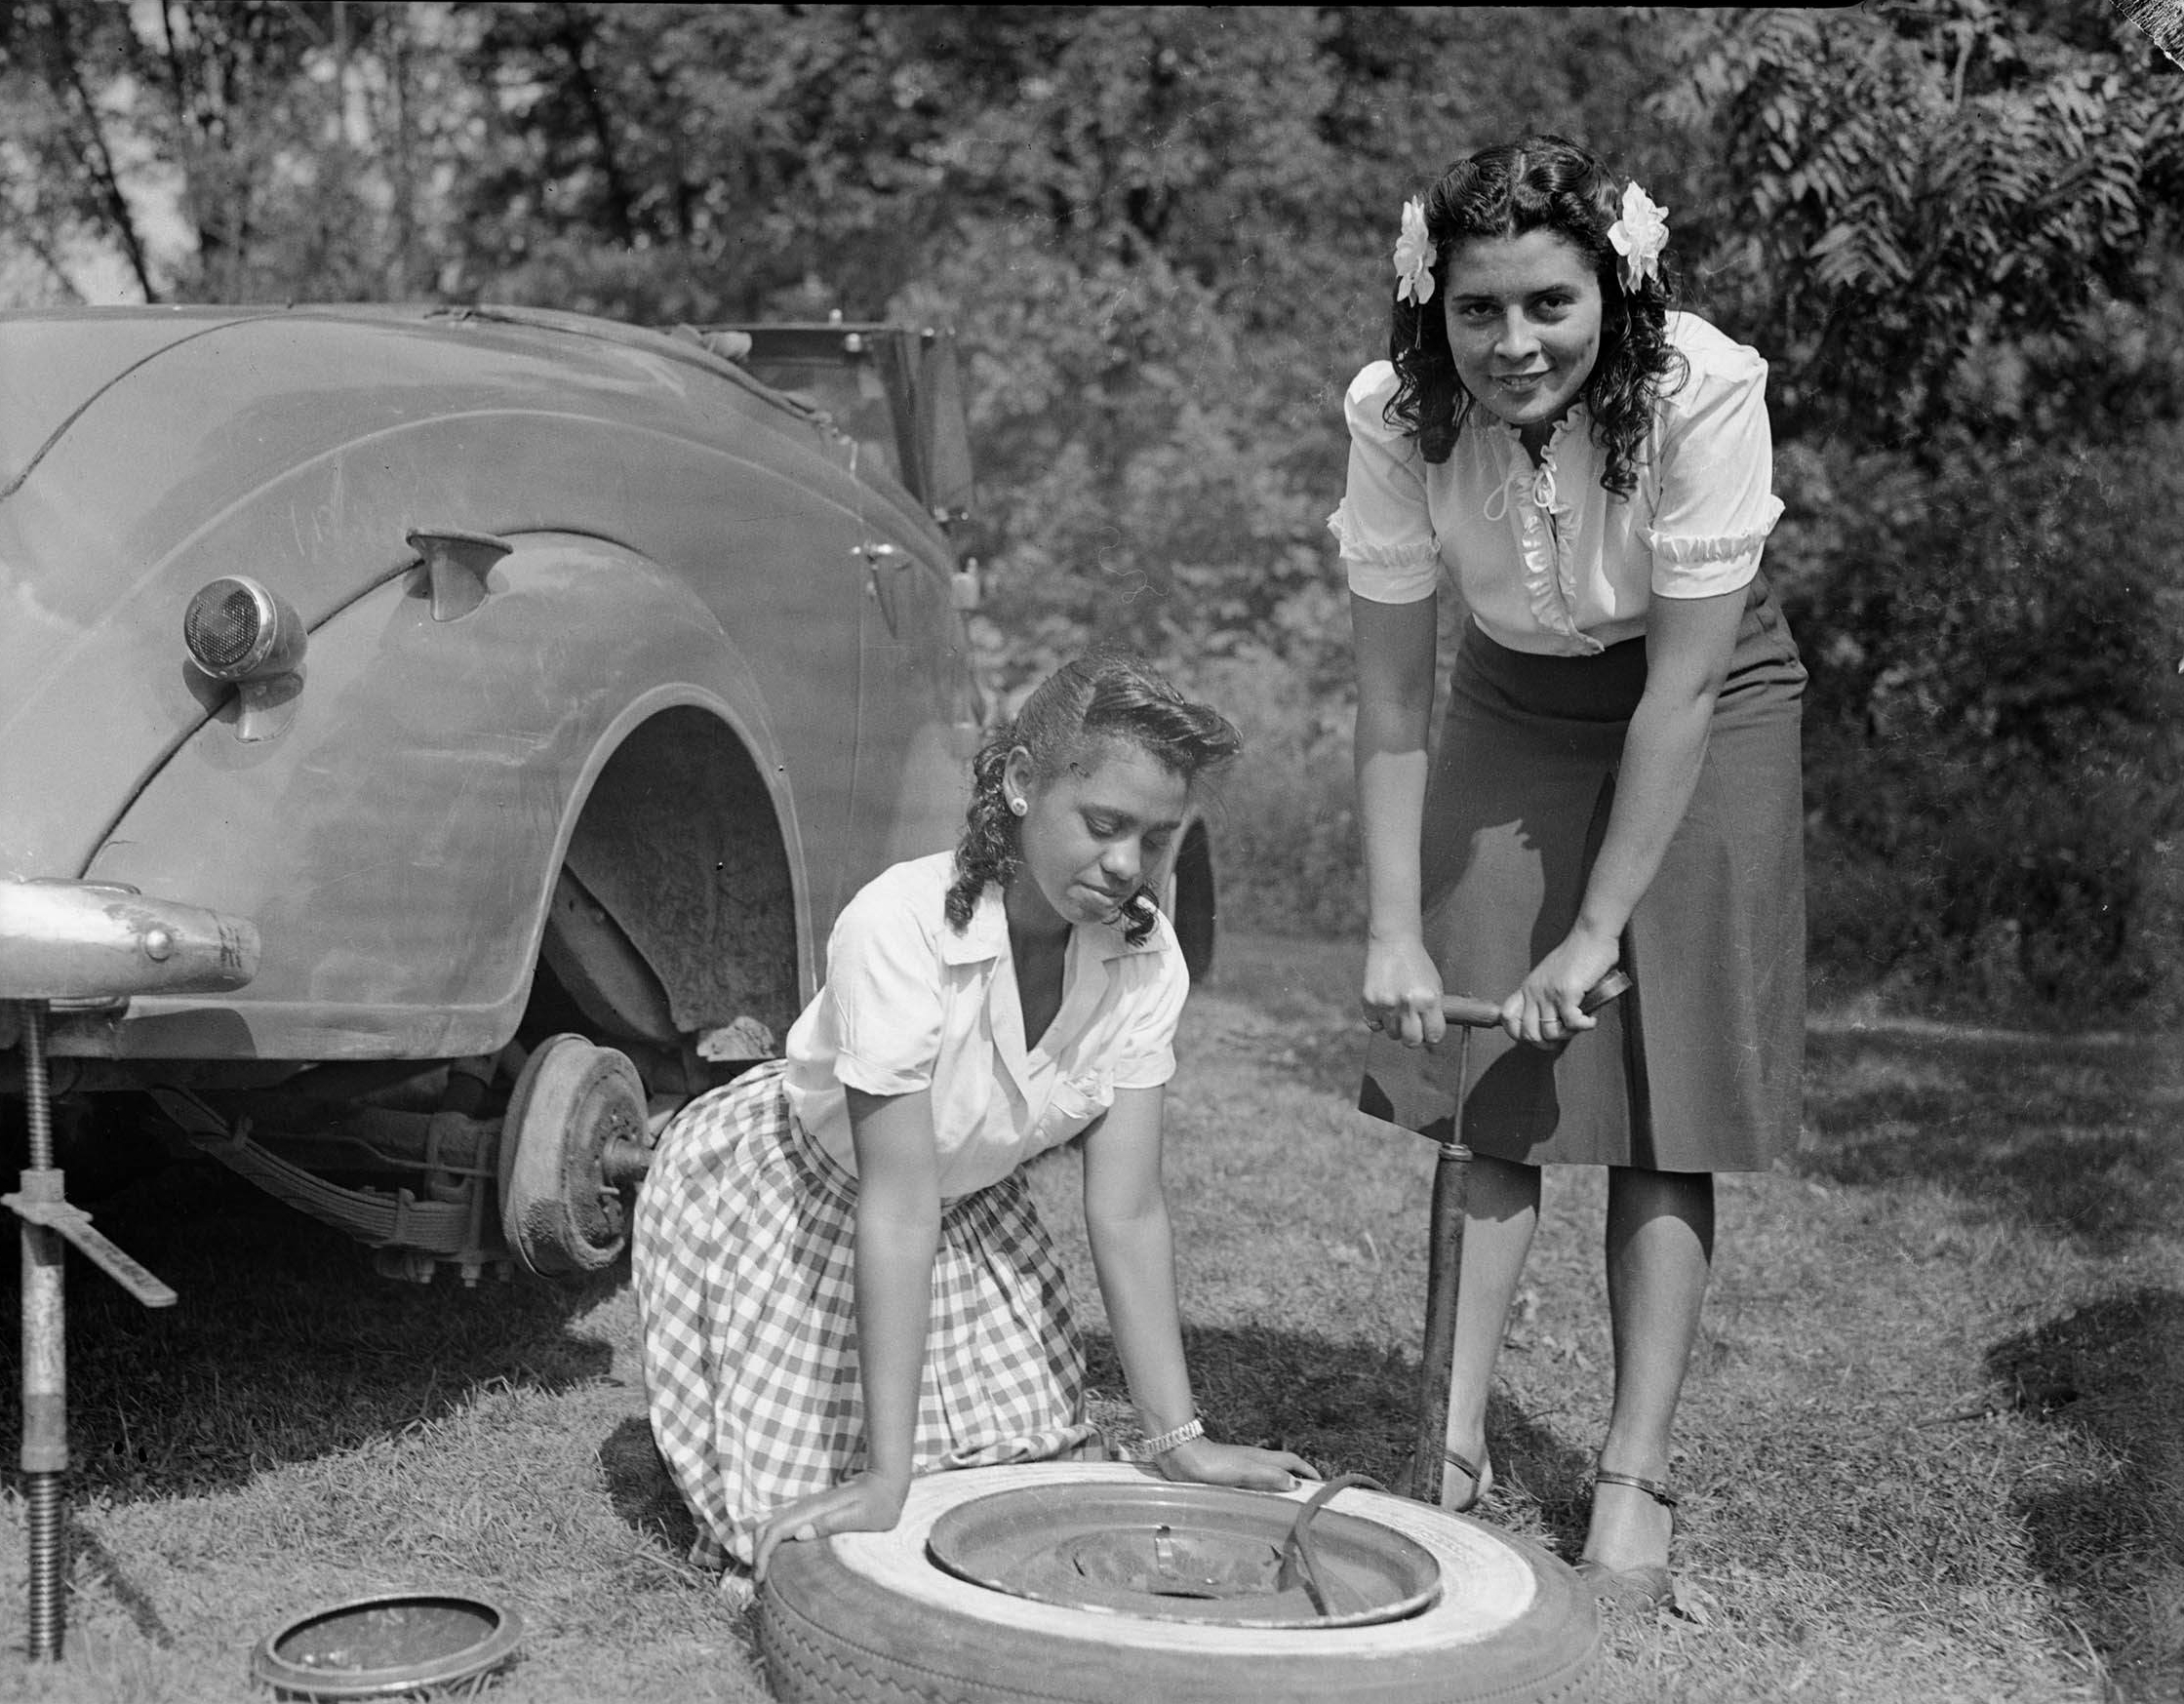 Charles "Teenie" Harris Archive Image of two women pumping air into a tire